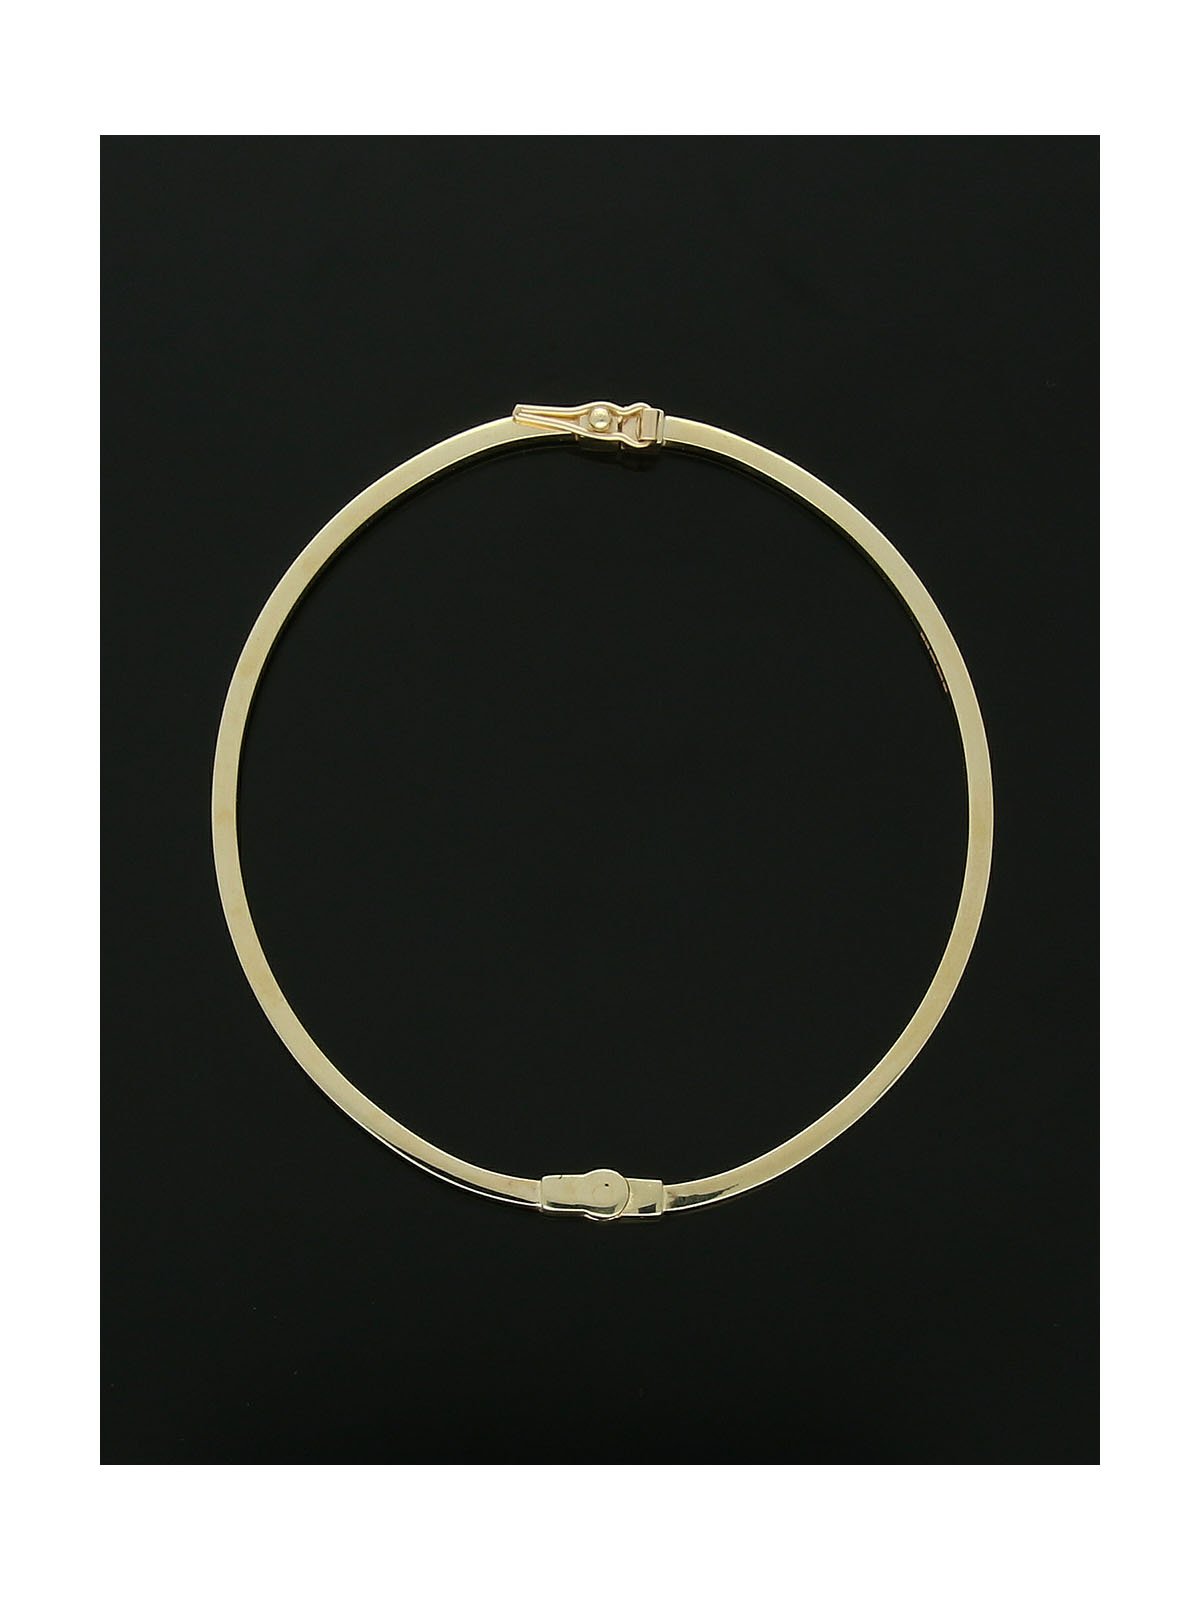 Solid Bangle in 9ct Yellow Gold